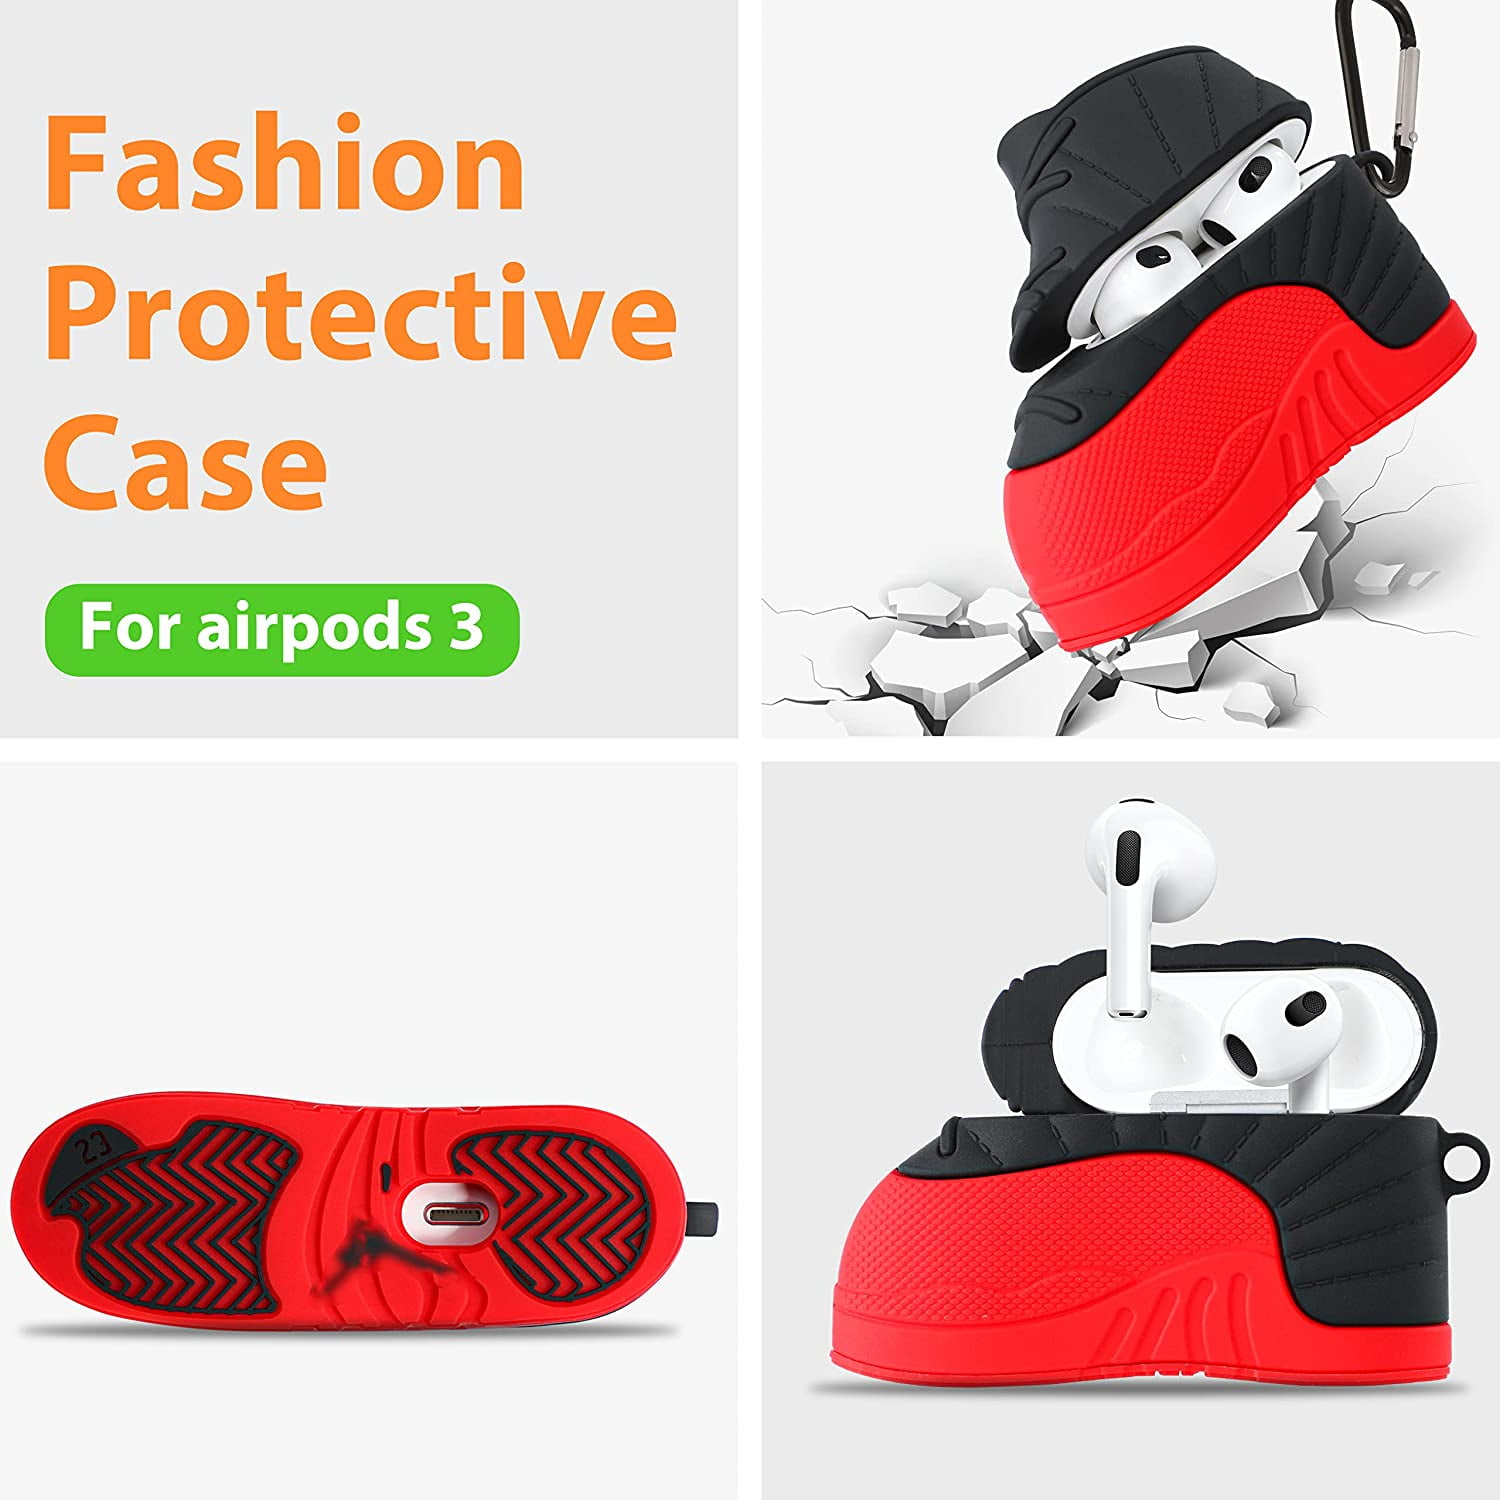 For Airpods 3 Generation Case 2021 Fashion Designer AirPods Cases Earphone  Package High Quality Case Key Chain Air Pods 3 Pro 2nd 6649863 From Lbsc,  $8.33